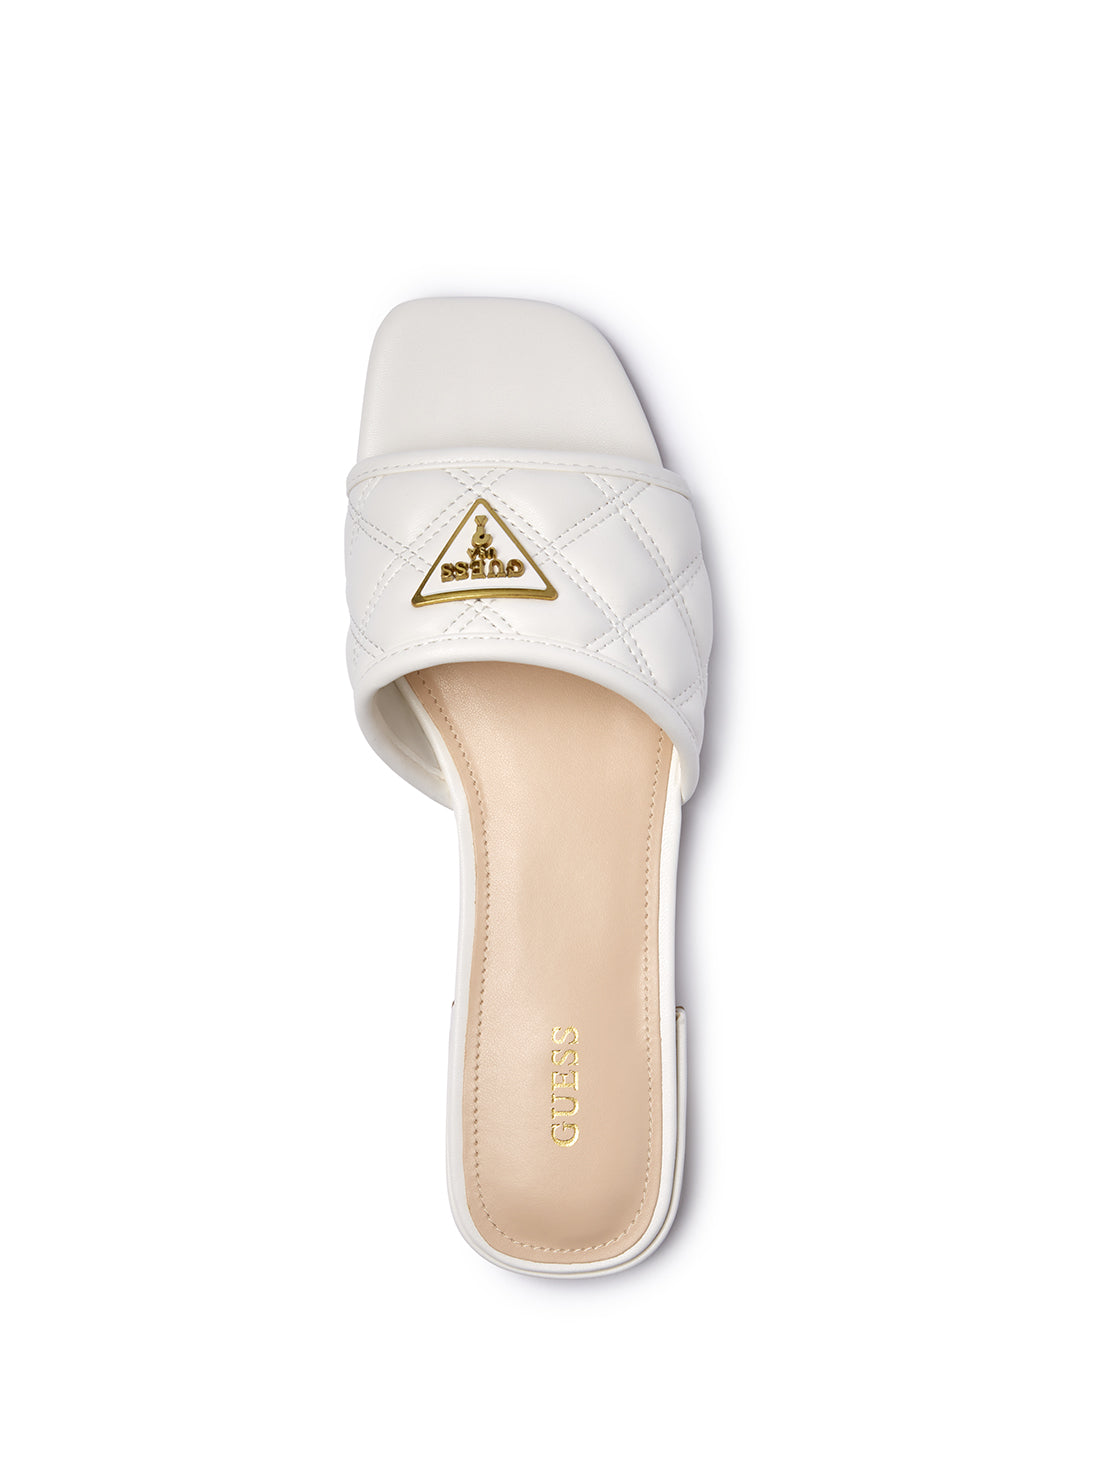 Guess White Huyana3 Cork Wedge Sandals - Women's (€56) ❤ liked on Polyvore  featuring shoes, sandals… | White wedge shoes, Lace up wedge sandals, White  wedge sandals